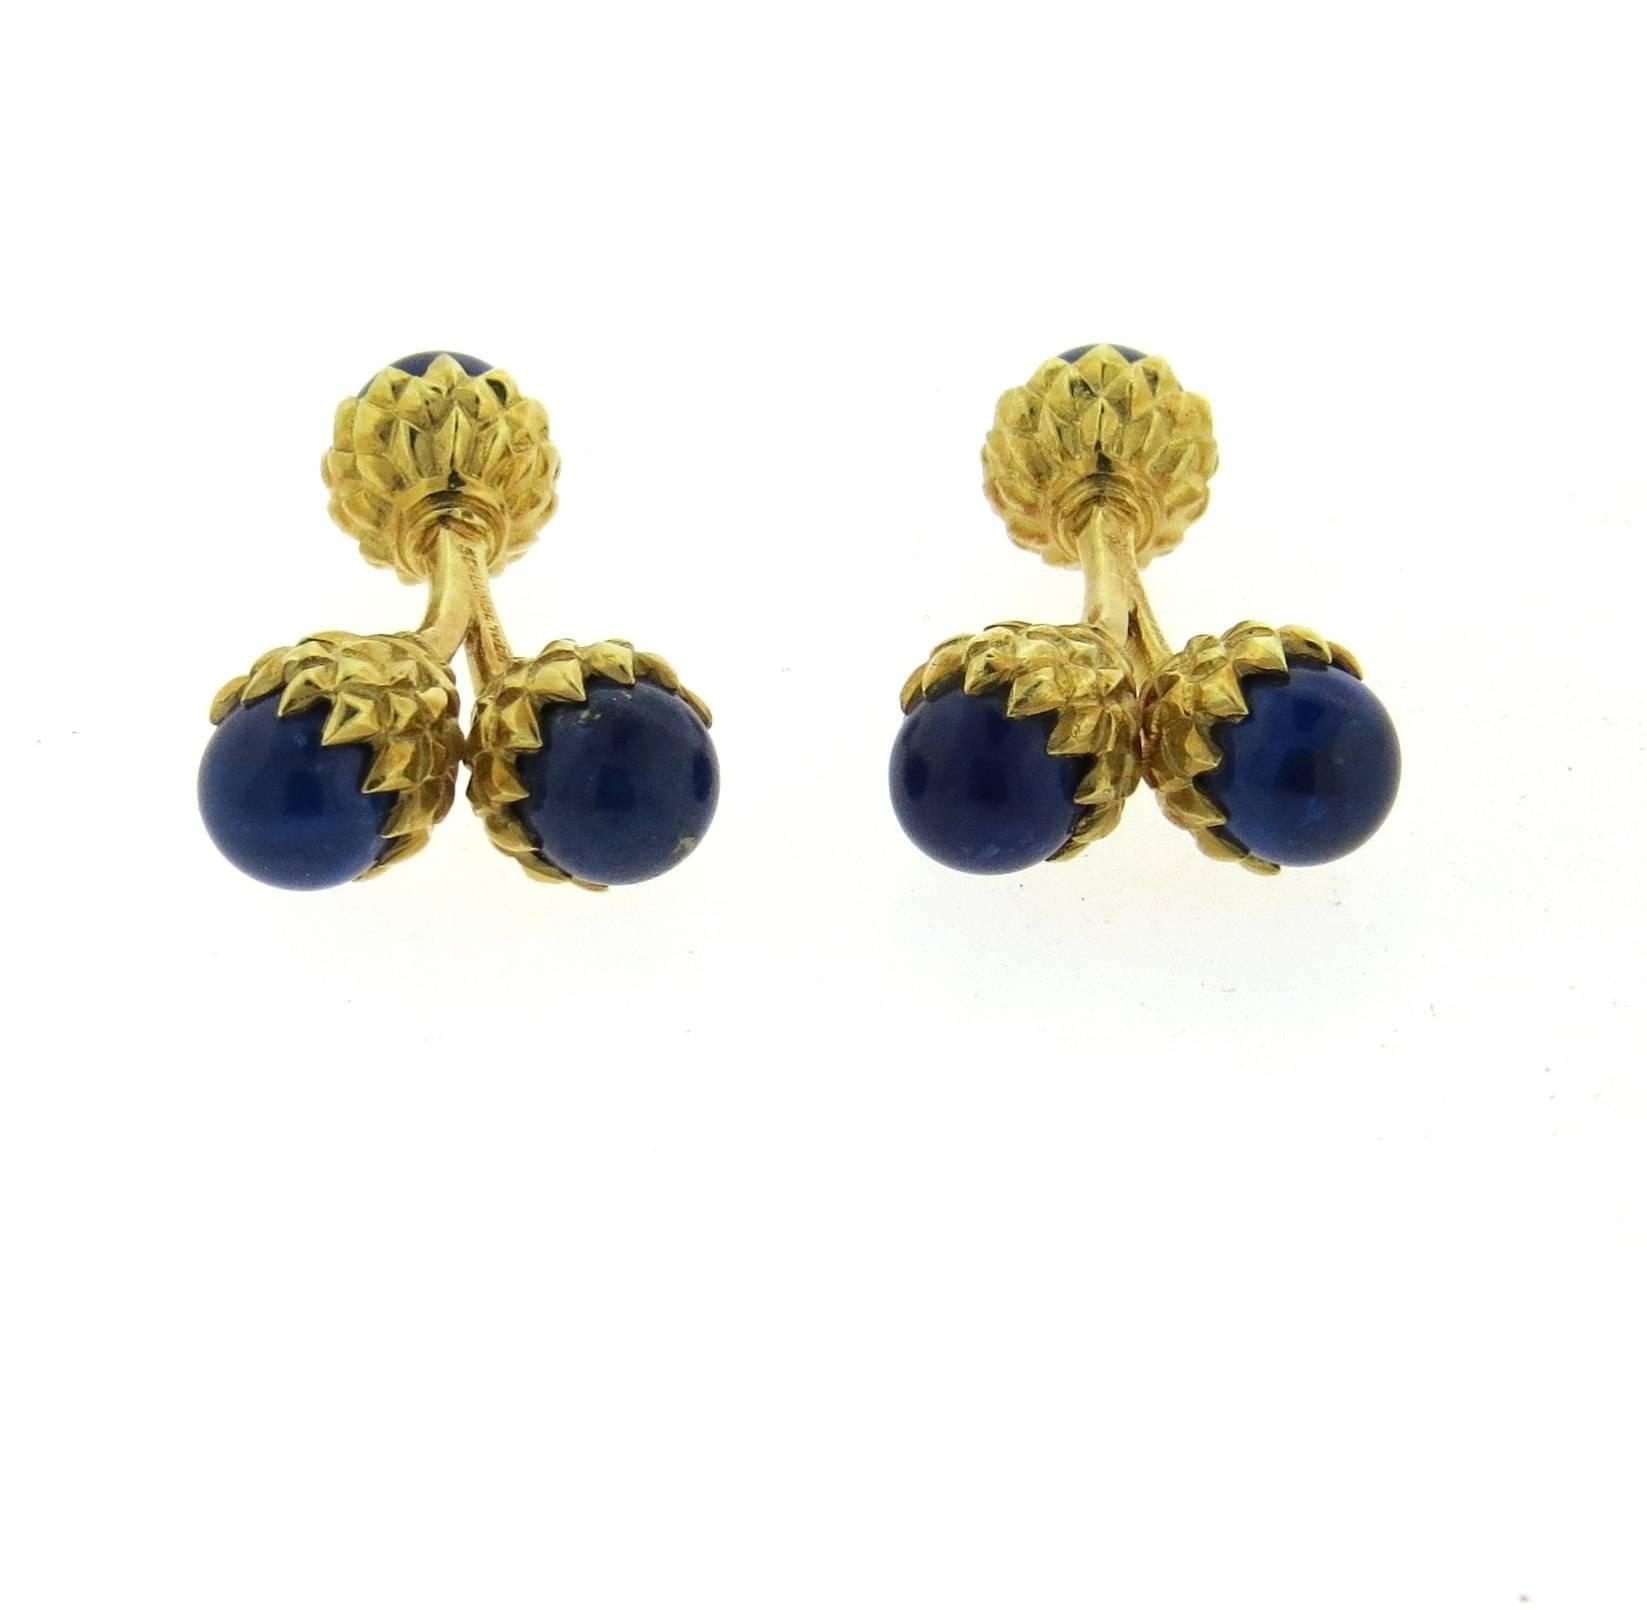 A pair of 18k yellow gold acorn cufflinks, crafted by Jean Schlumberger for Tiffany & Co, featuring lapis lazuli stones. Each acorn measures 9.6mm in diameter . Marked: Schlumberger, Tiffany 18k. Weight - 16.1 grams
